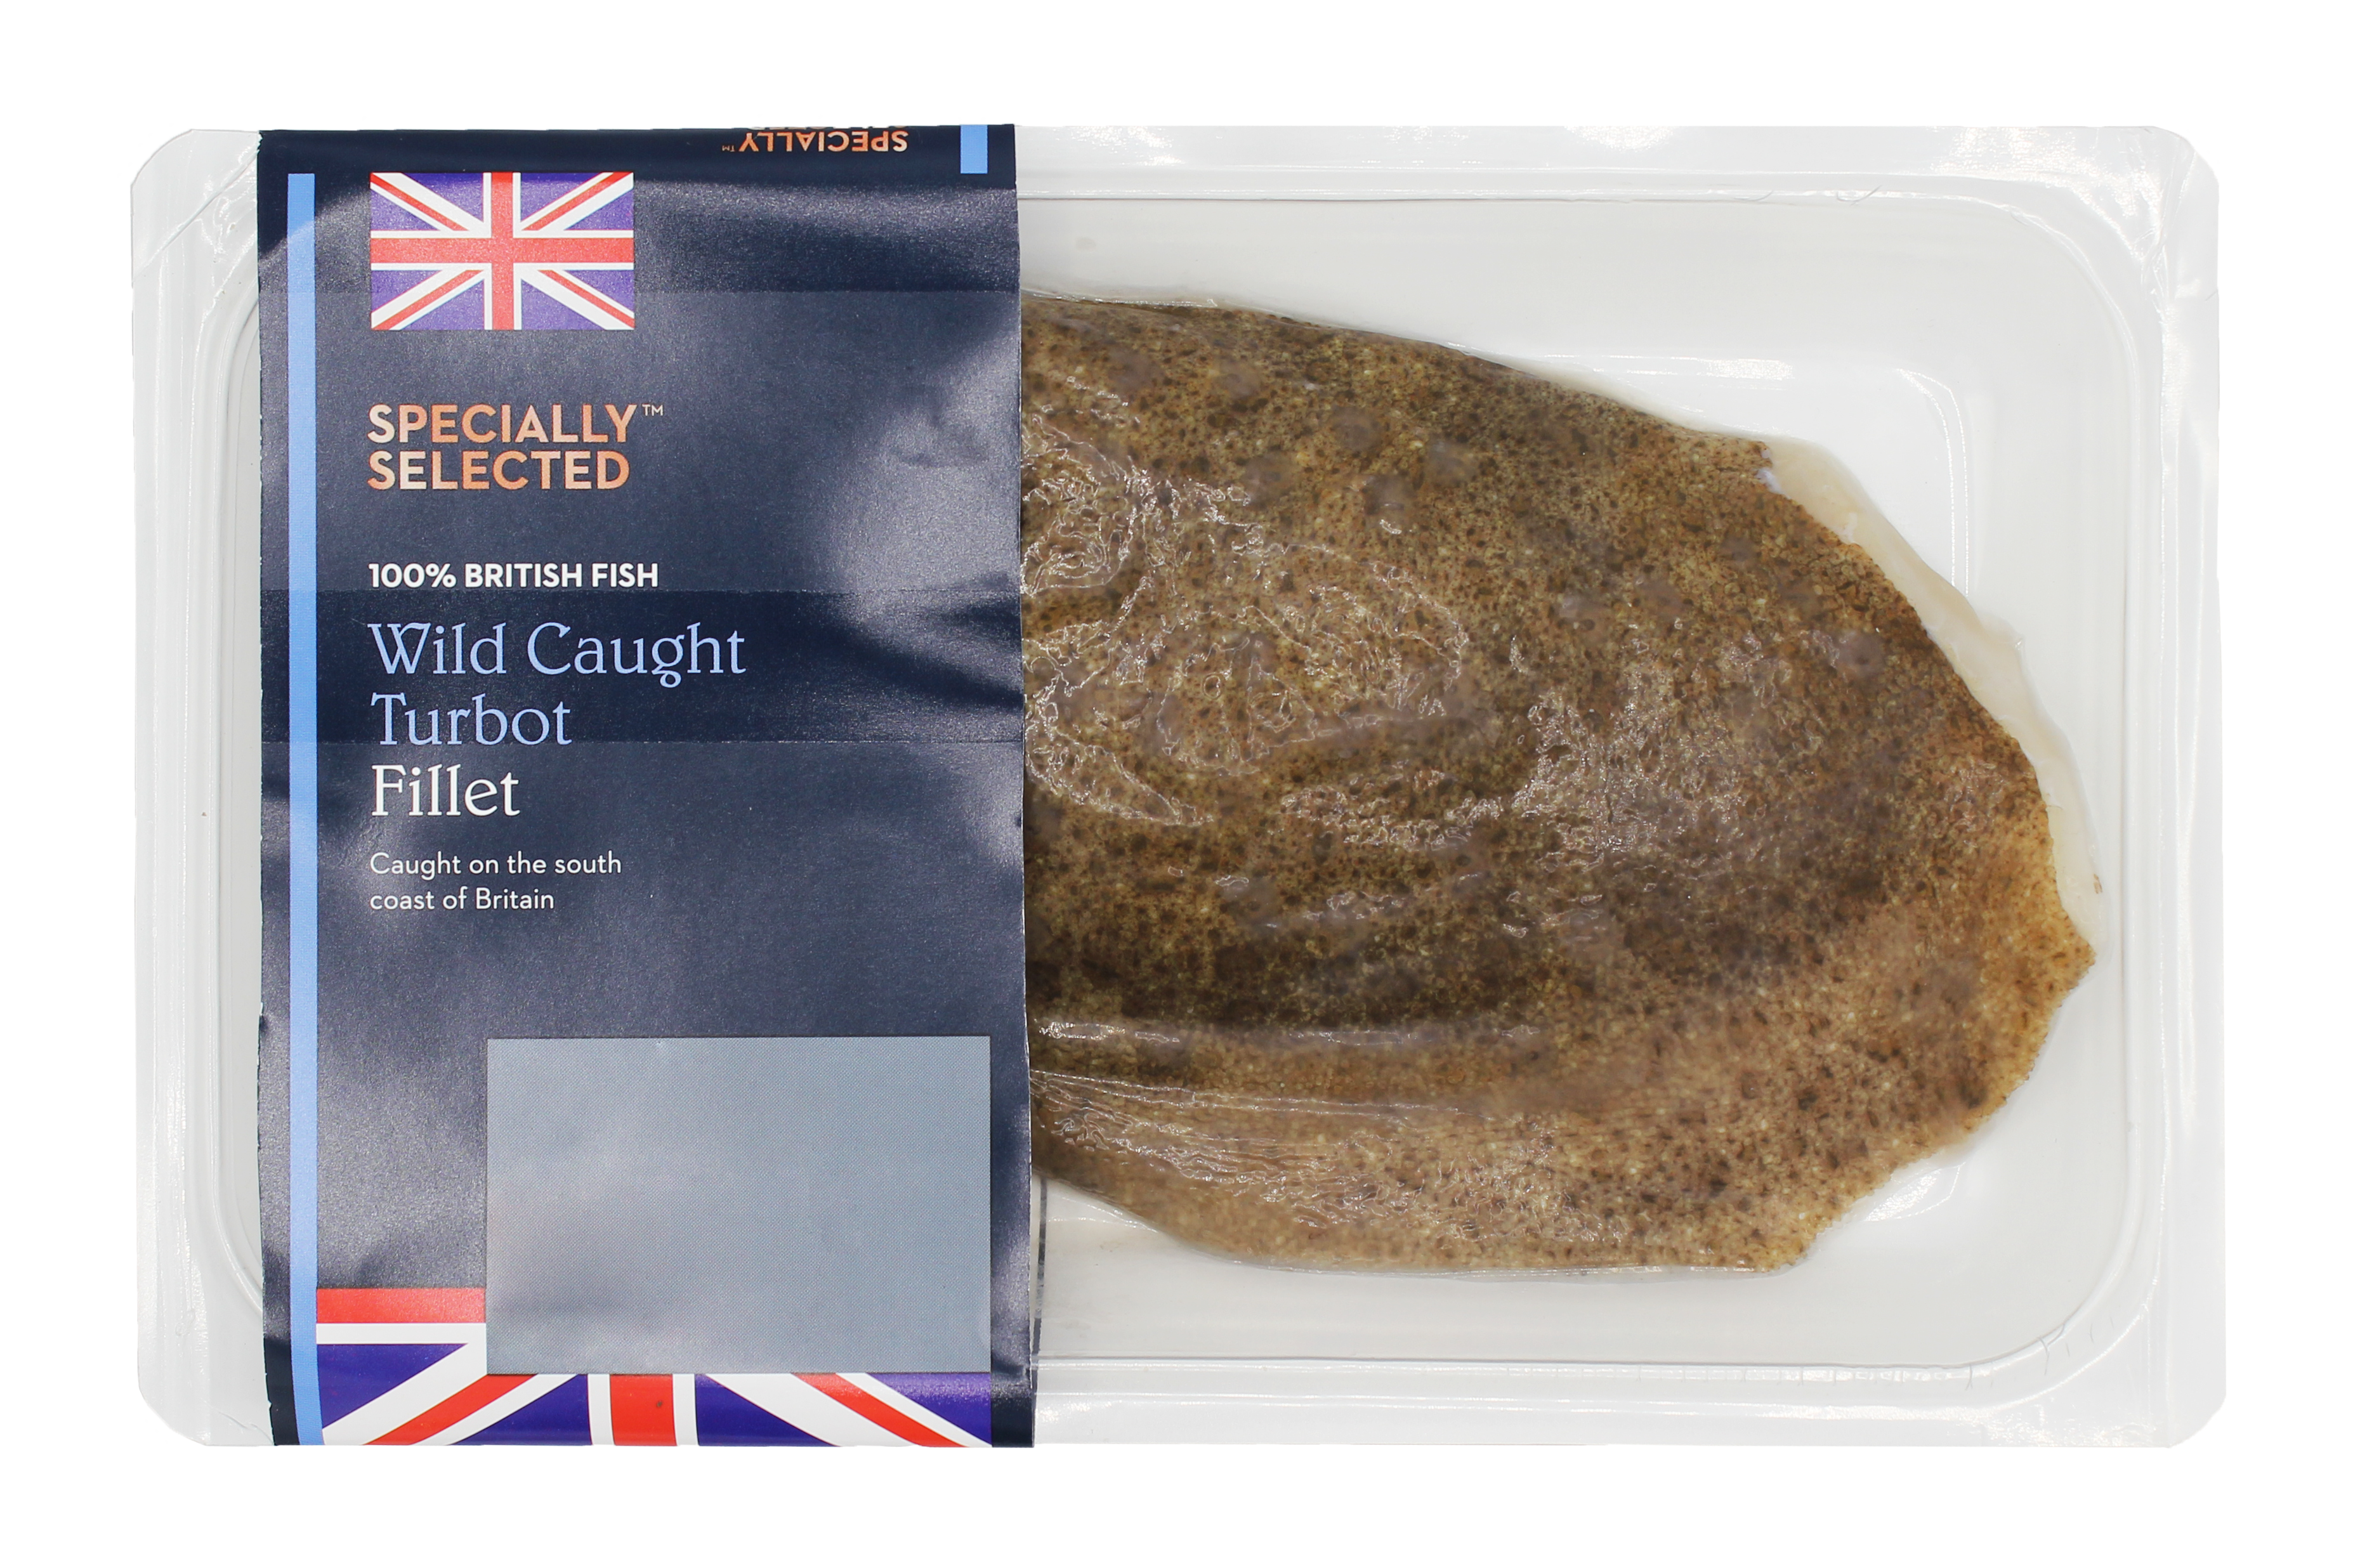 THE BAIT IS OVER - ALDI IS THE FIRST UK SUPERMARKET TO LAUNCH UPMARKET  TURBOT AND IT'S MORE THAN 50% CHEAPER THAN HIGH-END RESTAURANTS - ALDI UK  Press Office